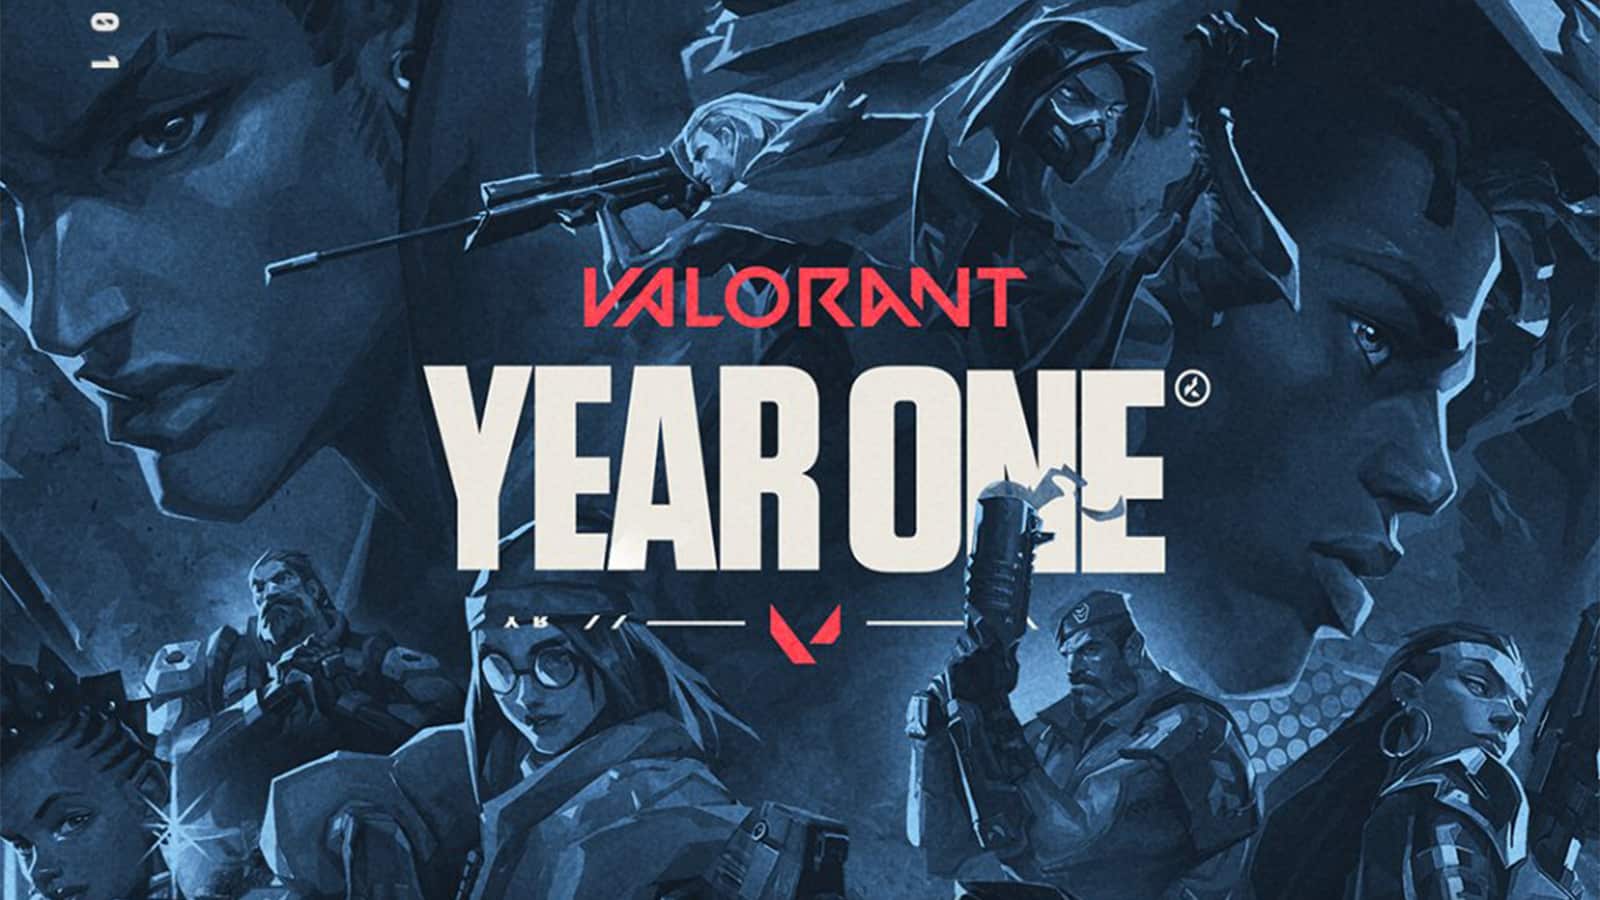 Share your One Year Anniversary stats! I'd love to see. : r/VALORANT